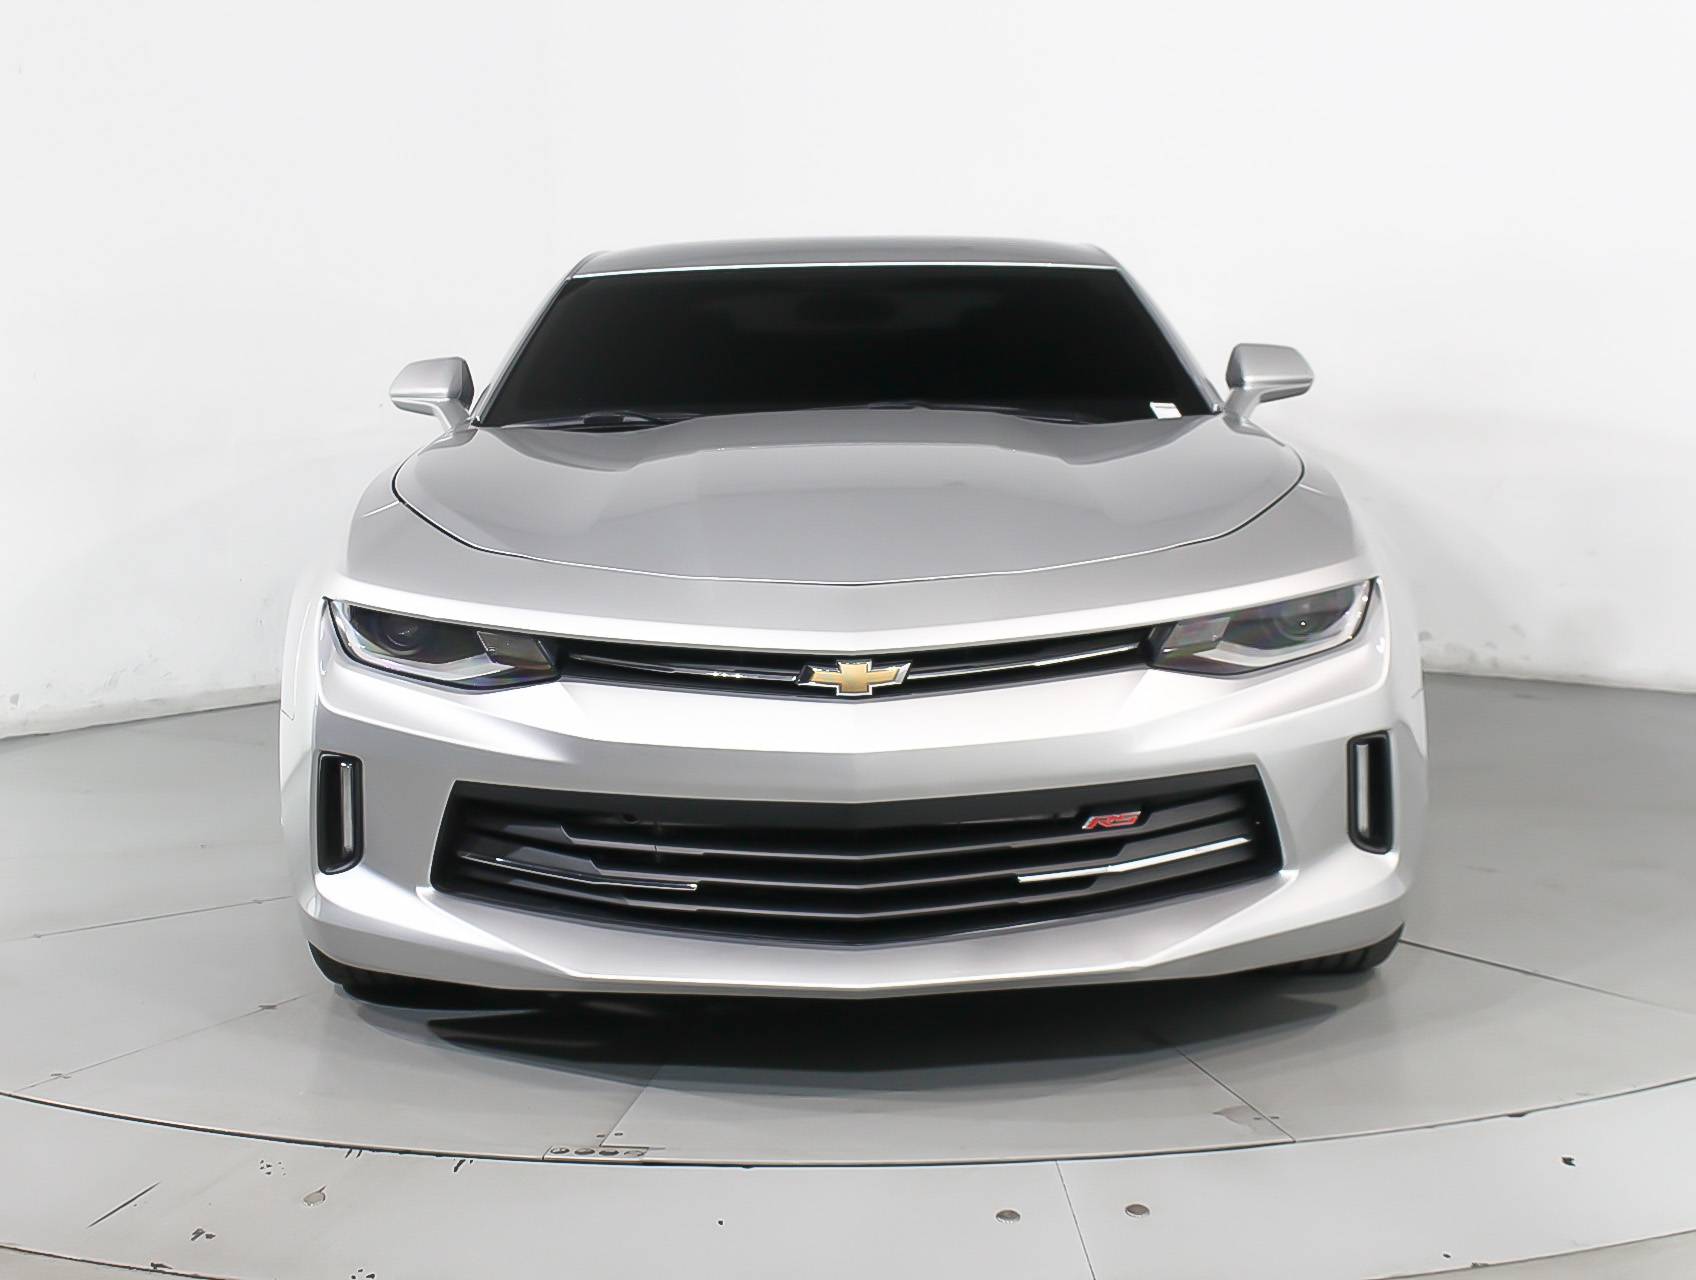 Florida Fine Cars - Used CHEVROLET CAMARO 2018 MARGATE 1lt Rs Package